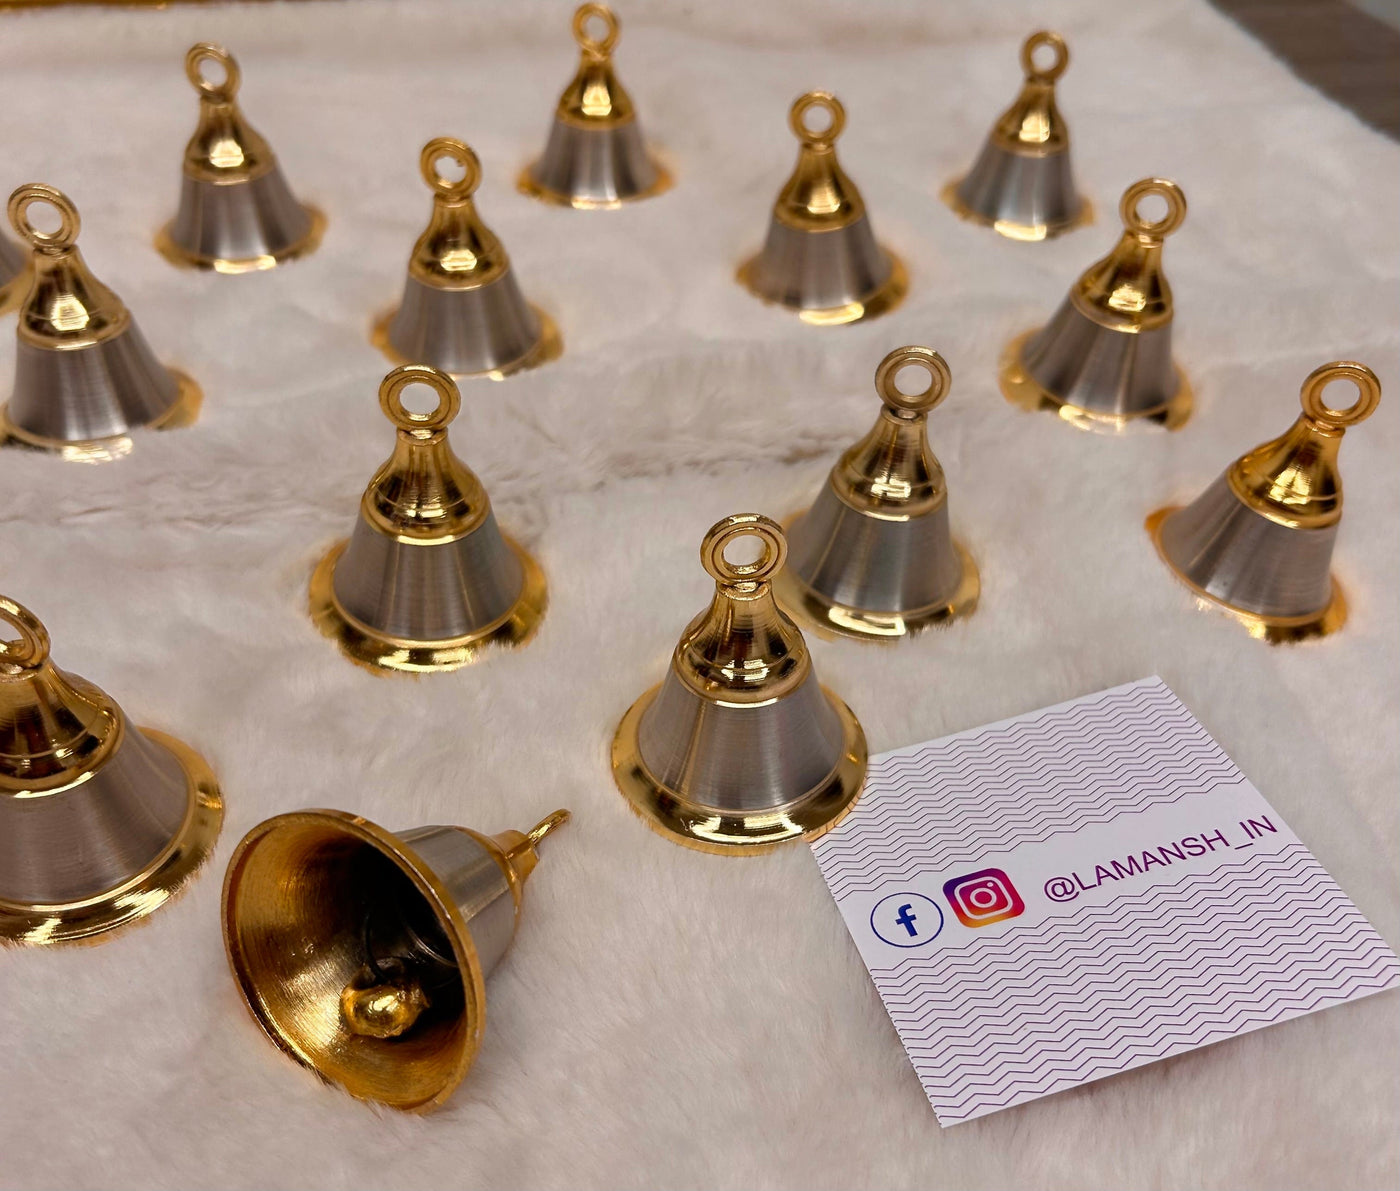 35 Rs each on buying 🏷in bulk | Call 📞 at 8619550223 bells for couple welcome LAMANSH® Silver Golden Plated Bells 🔔 for welcoming couple's in wedding | German silver Gift Bells 🔔 for wedding guests